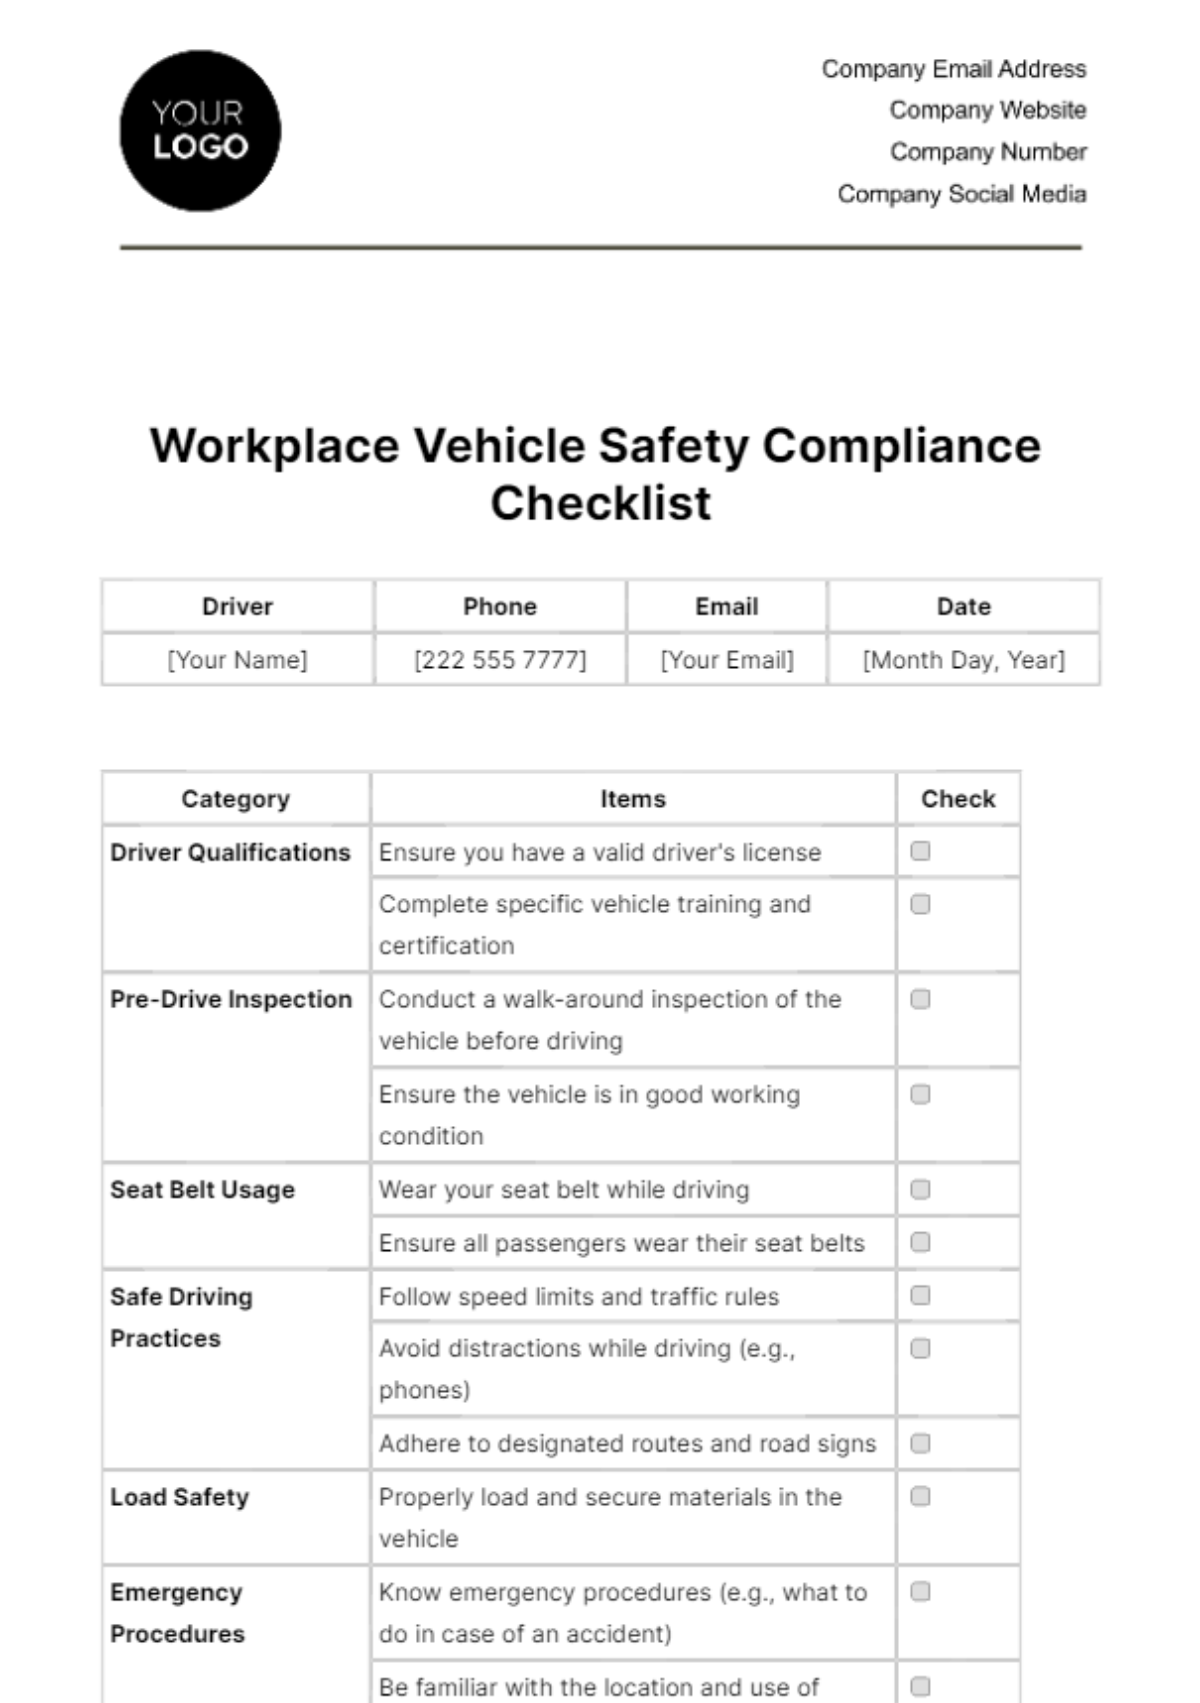 Free Workplace Vehicle Safety Compliance Checklist Template